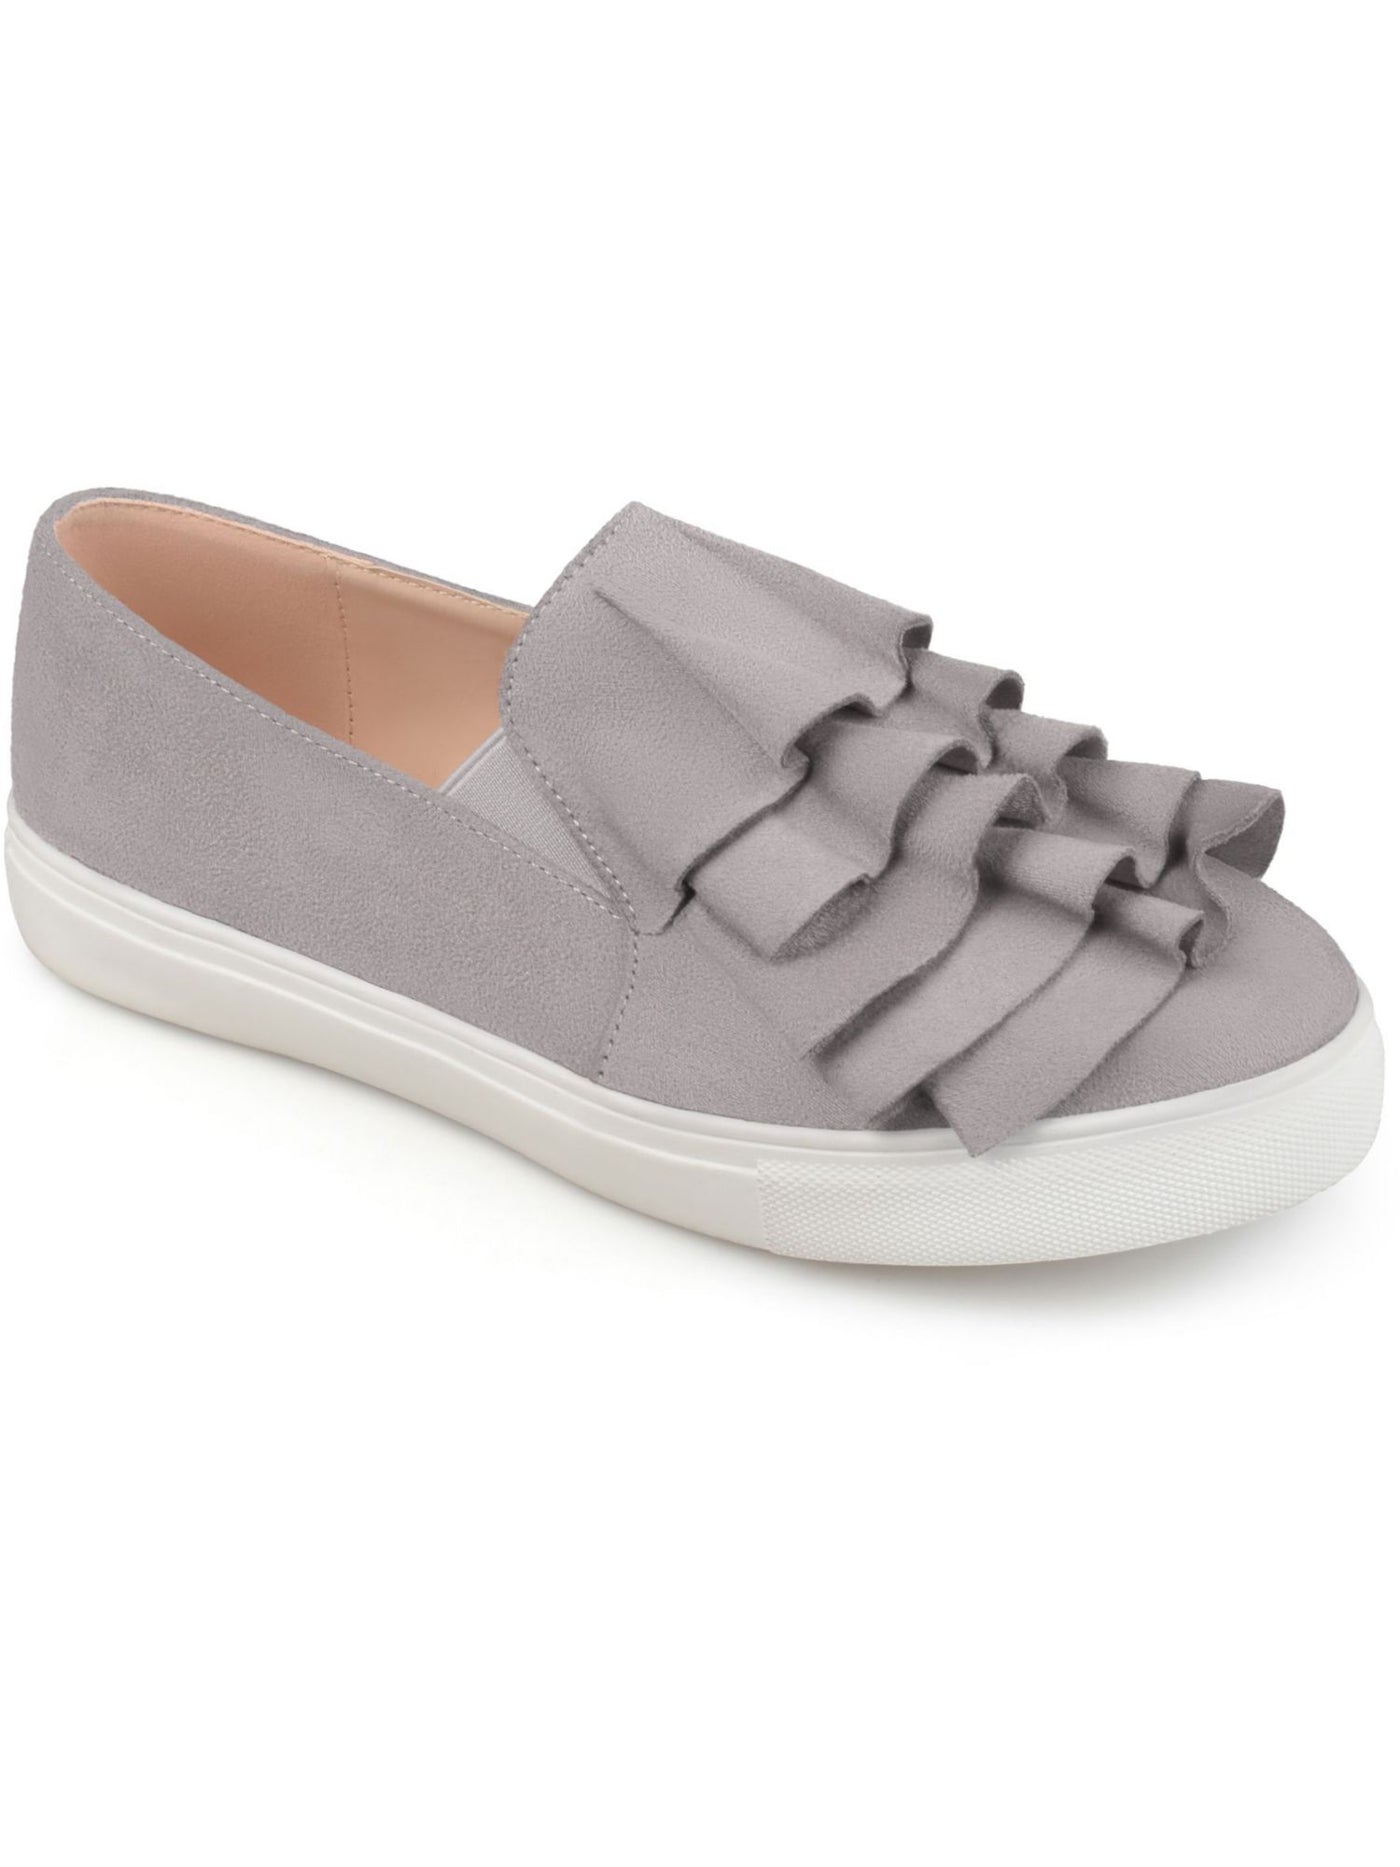 JOURNEE COLLECTION Womens Gray Layered Ruffle Design Glint Round Toe Athletic Sneakers Shoes 7